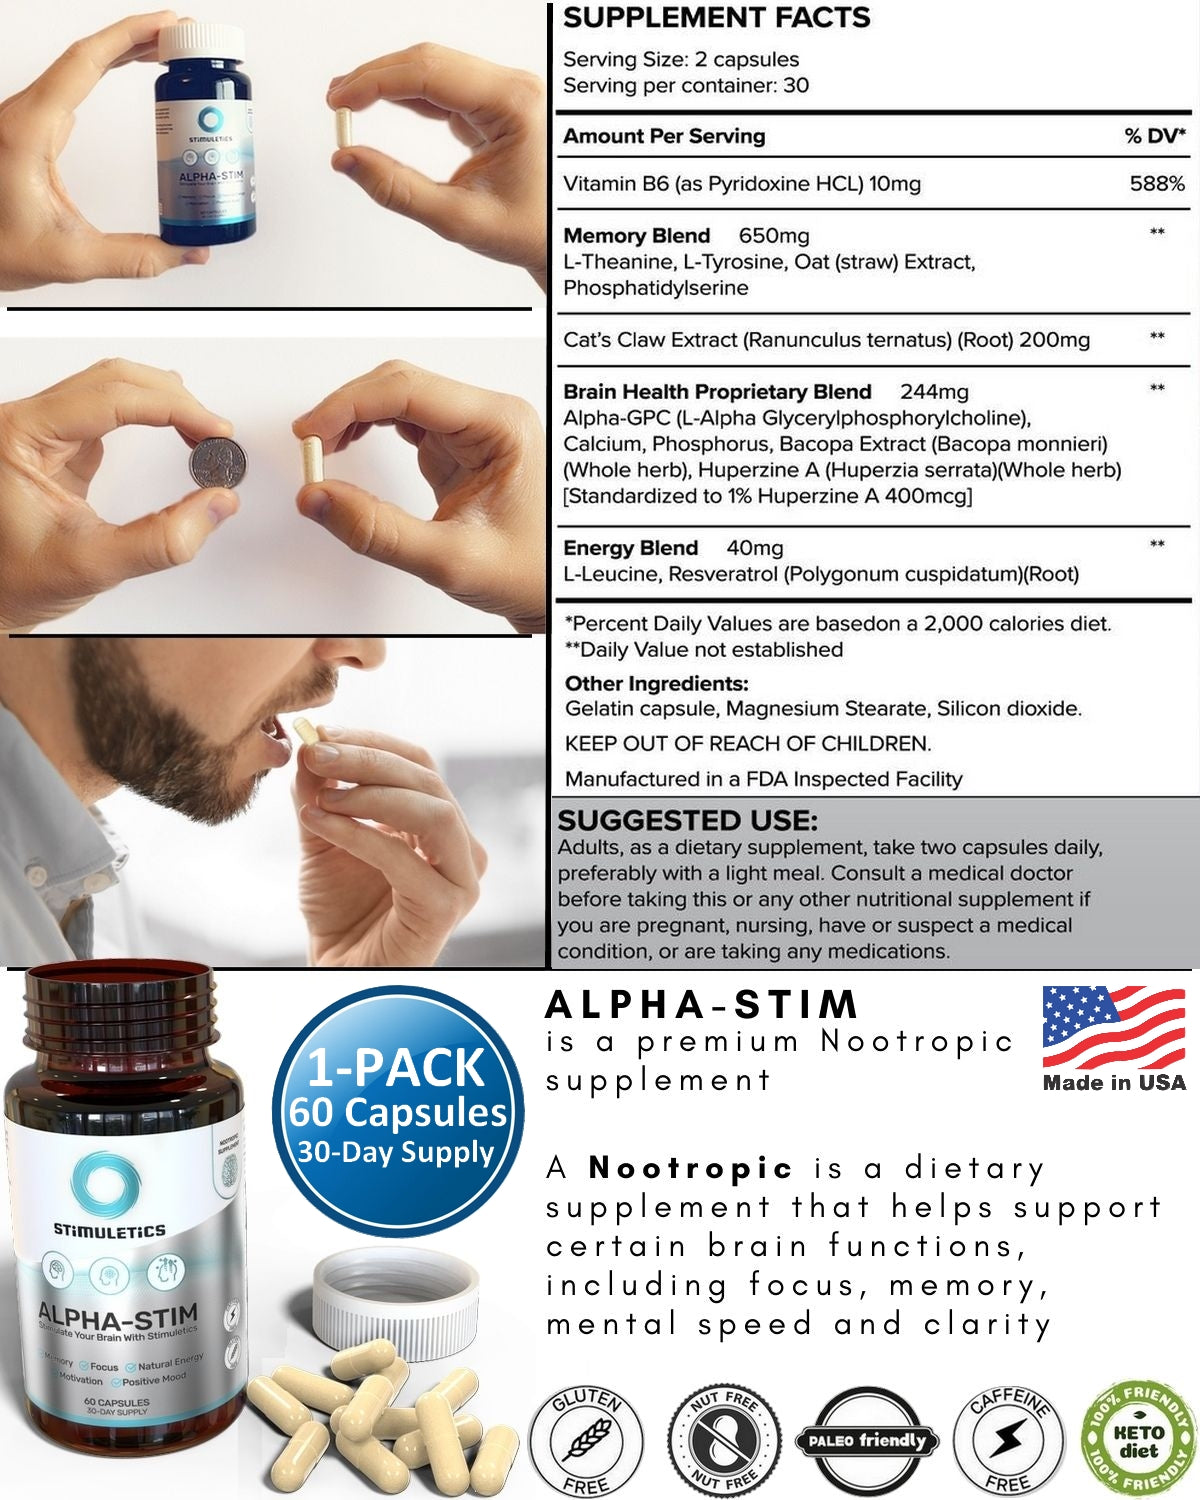 ALPHA-STIM Nootropic Brain Booster Supplement, 60 Capsules (30-Day Supply)